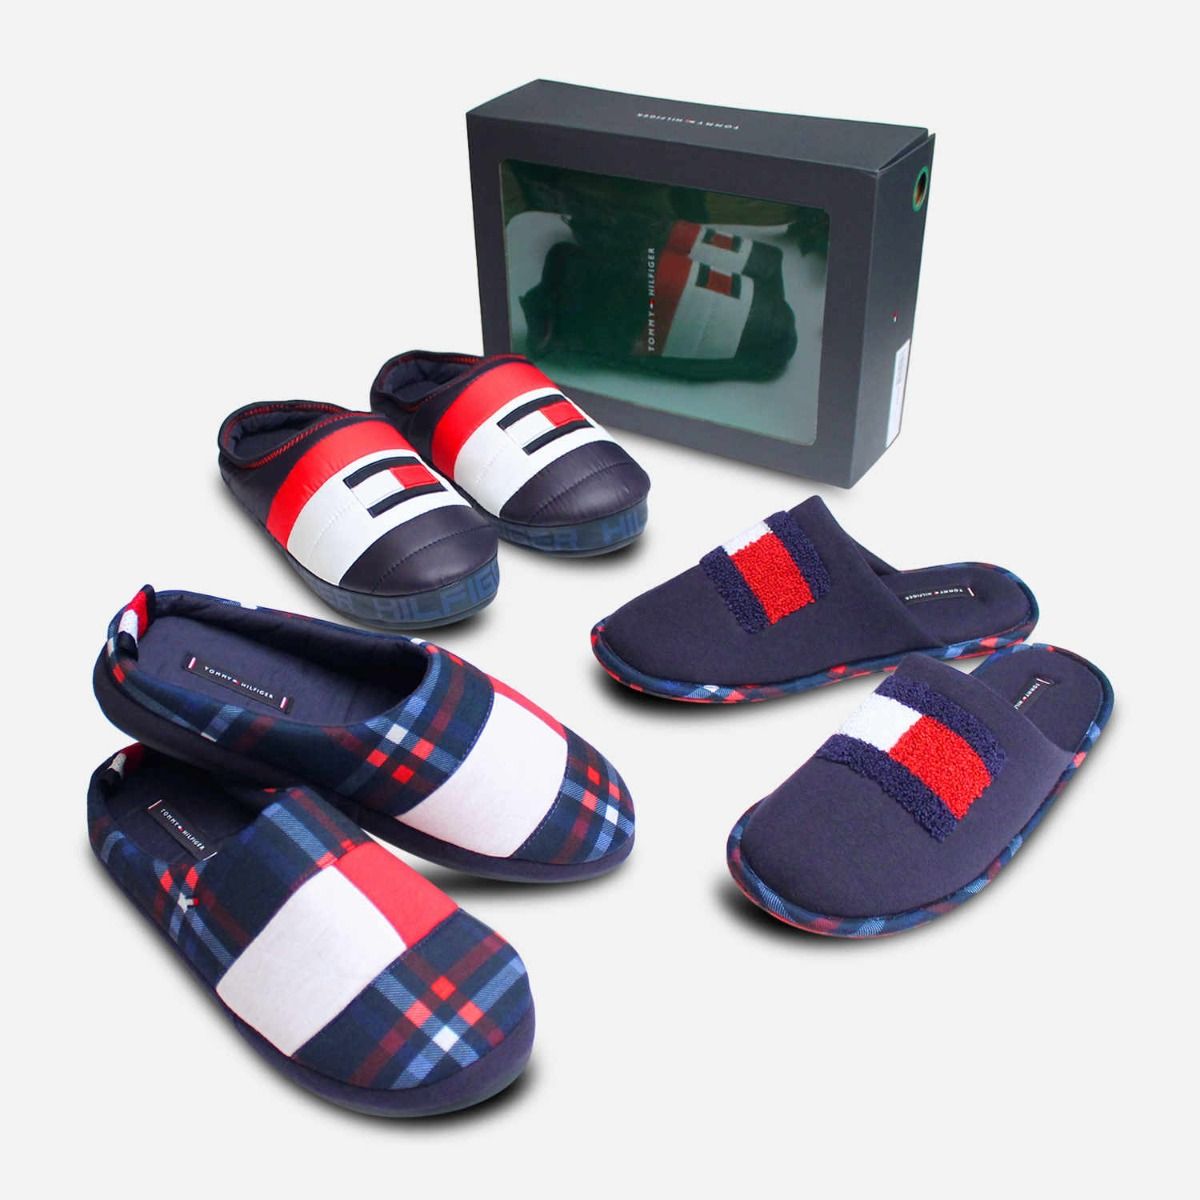 tommy hilfiger slippers for mens